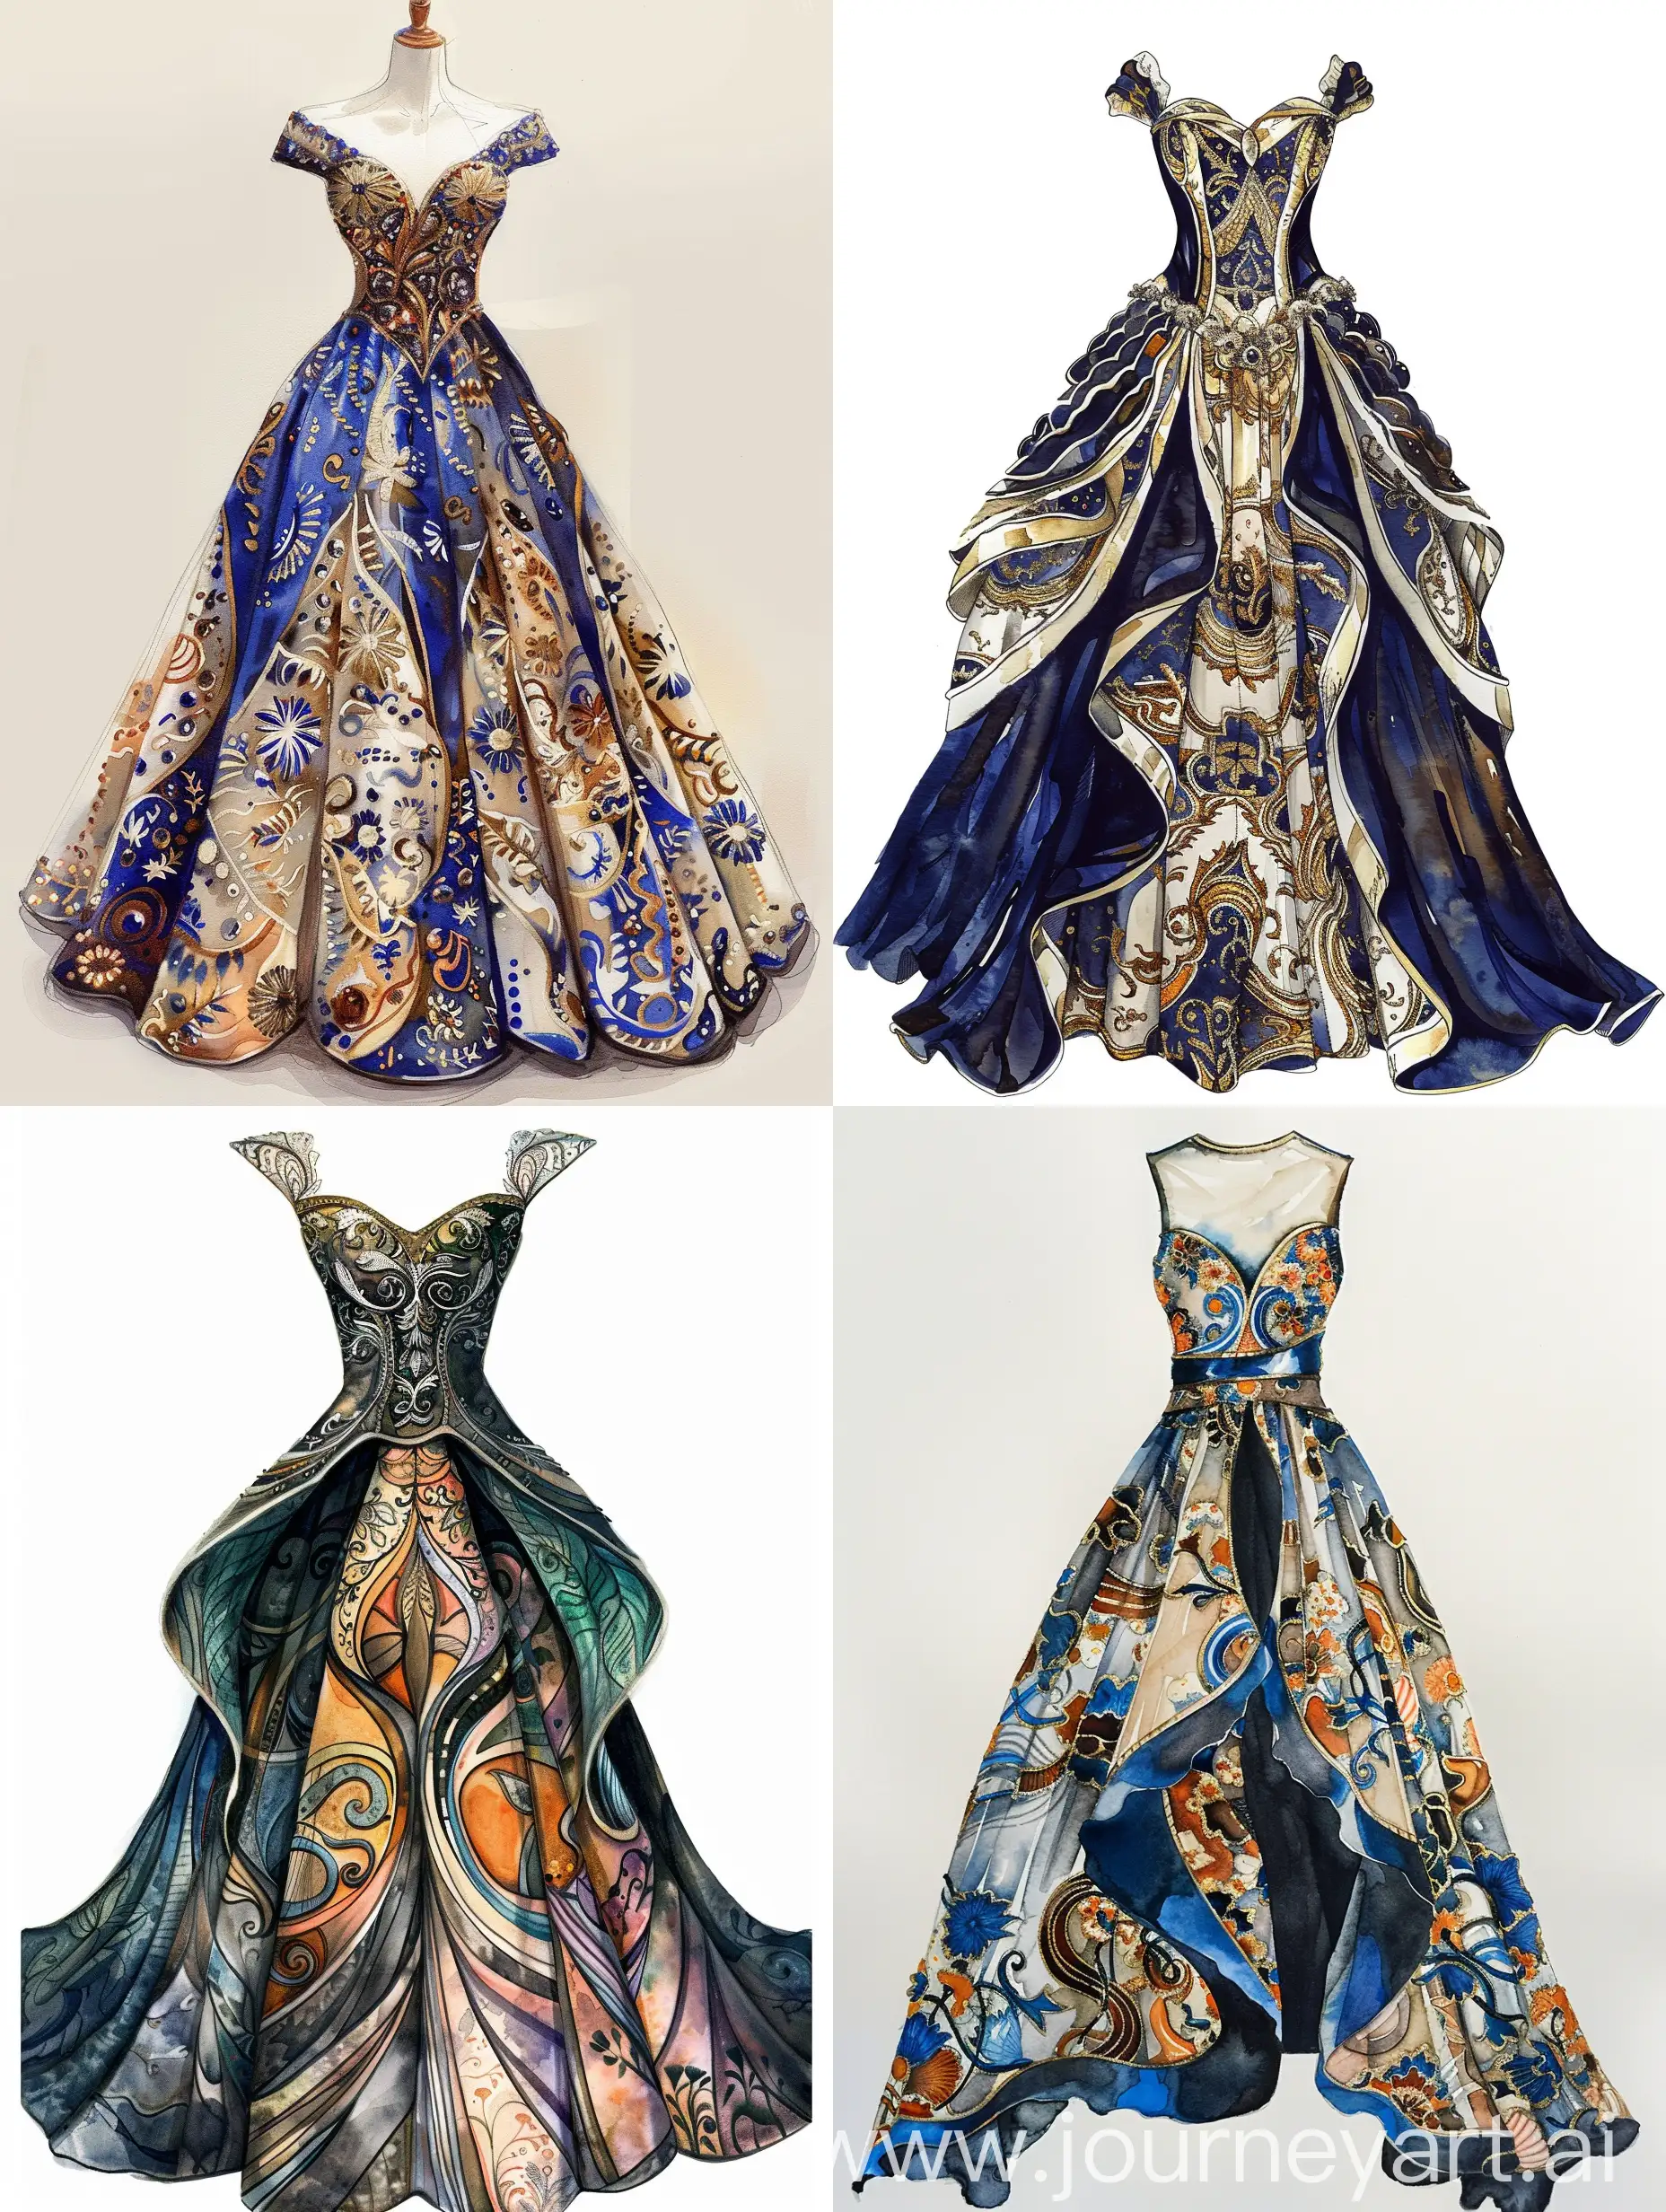 Elegant-Haute-Couture-Dress-with-Intricate-Murrine-Glass-Patterns